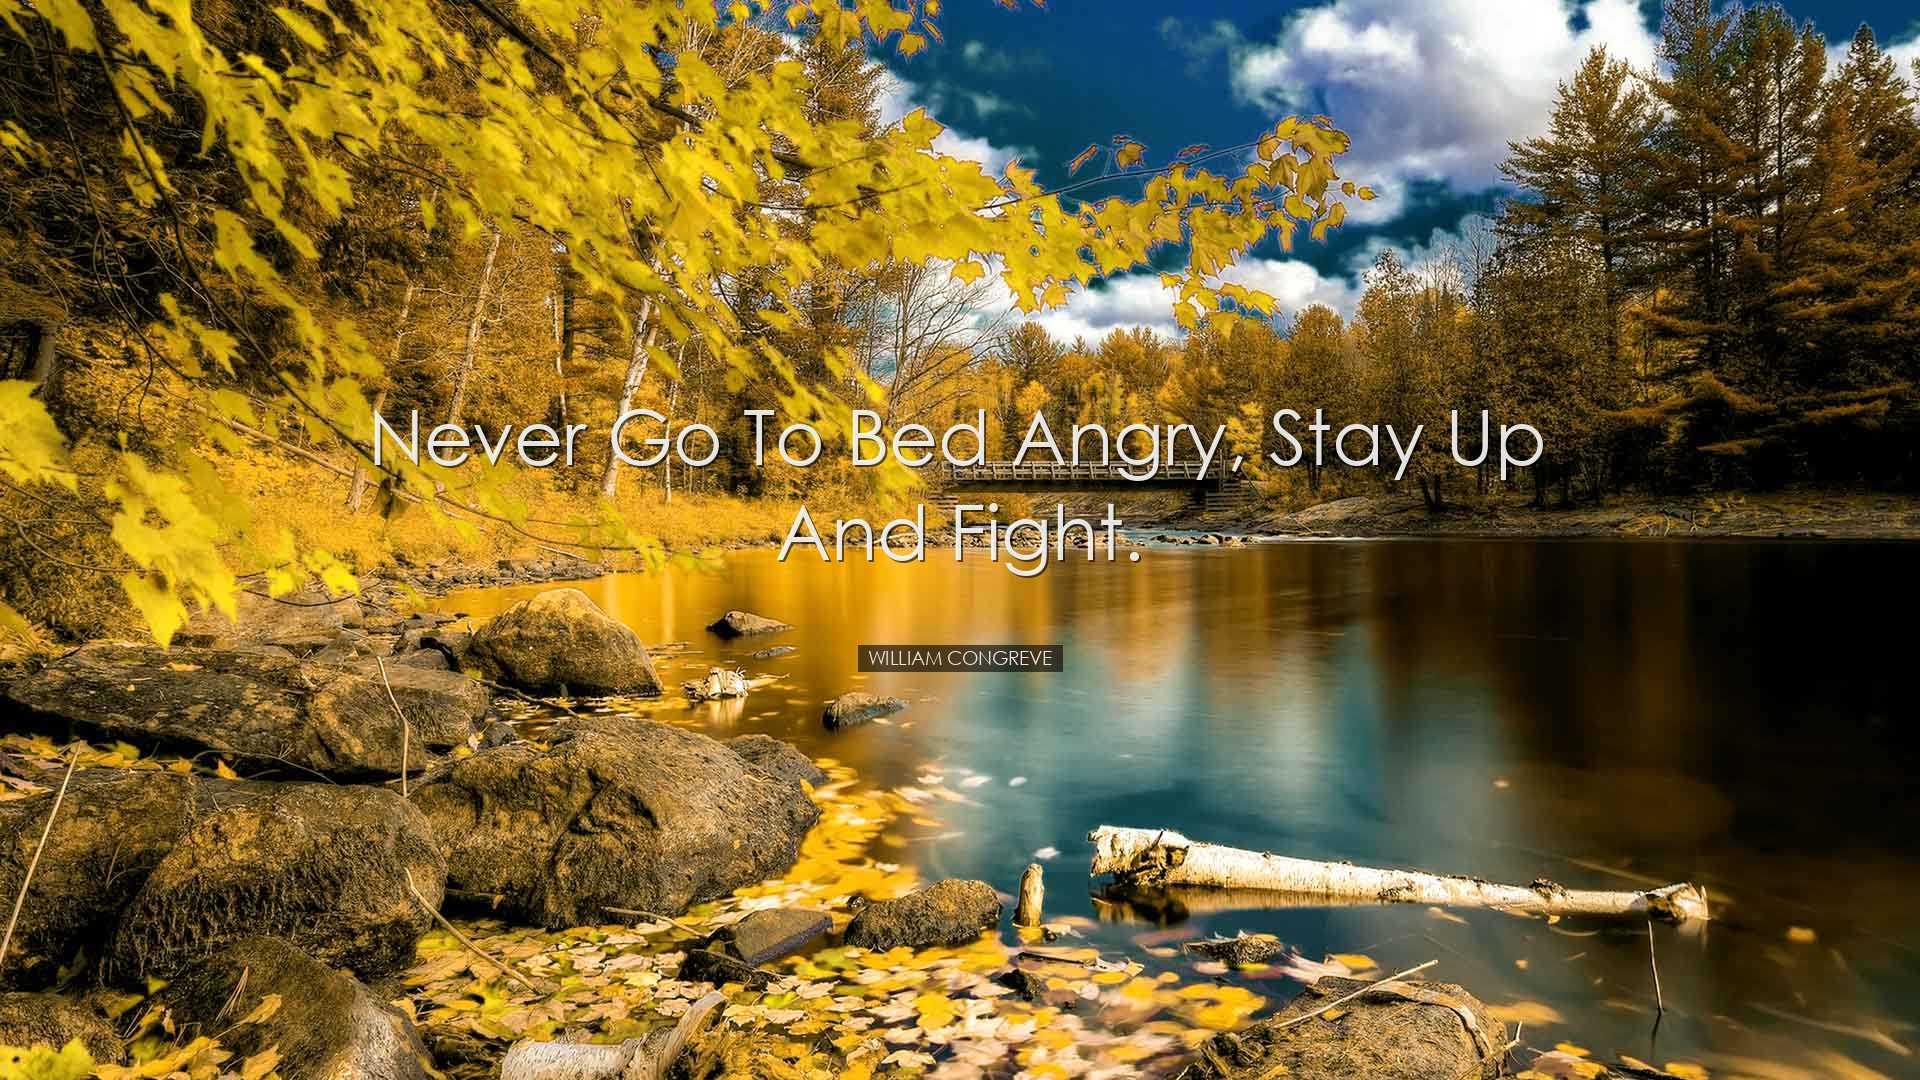 Never go to bed angry, stay up and fight. - William Congreve